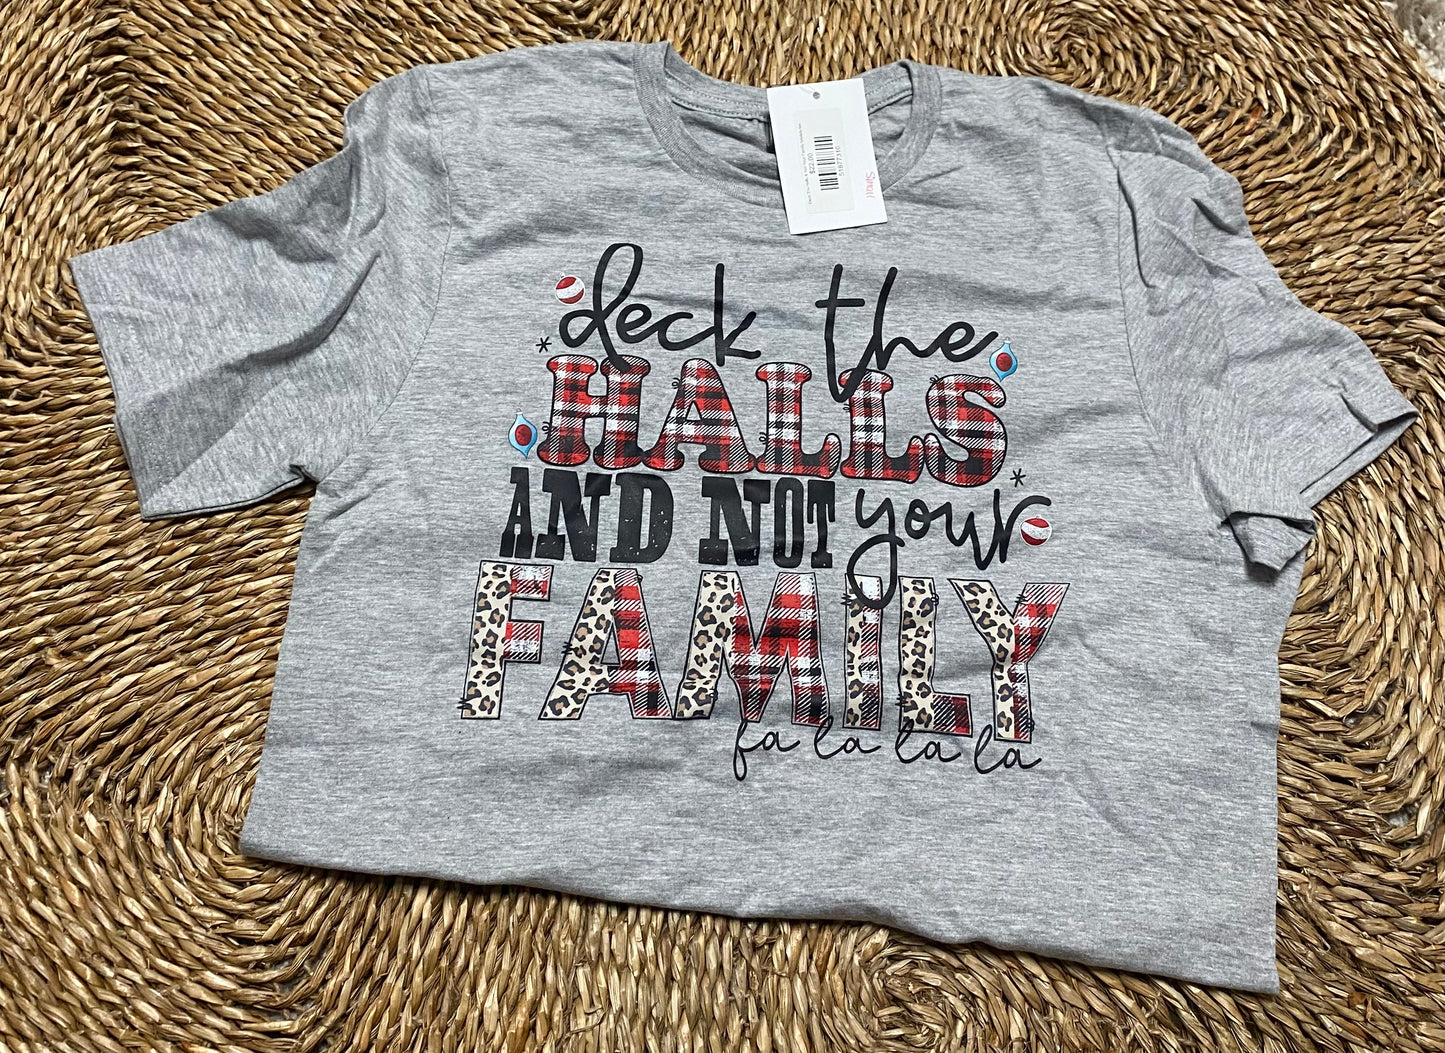 Deck The Halls & Not Your Family falalala tee